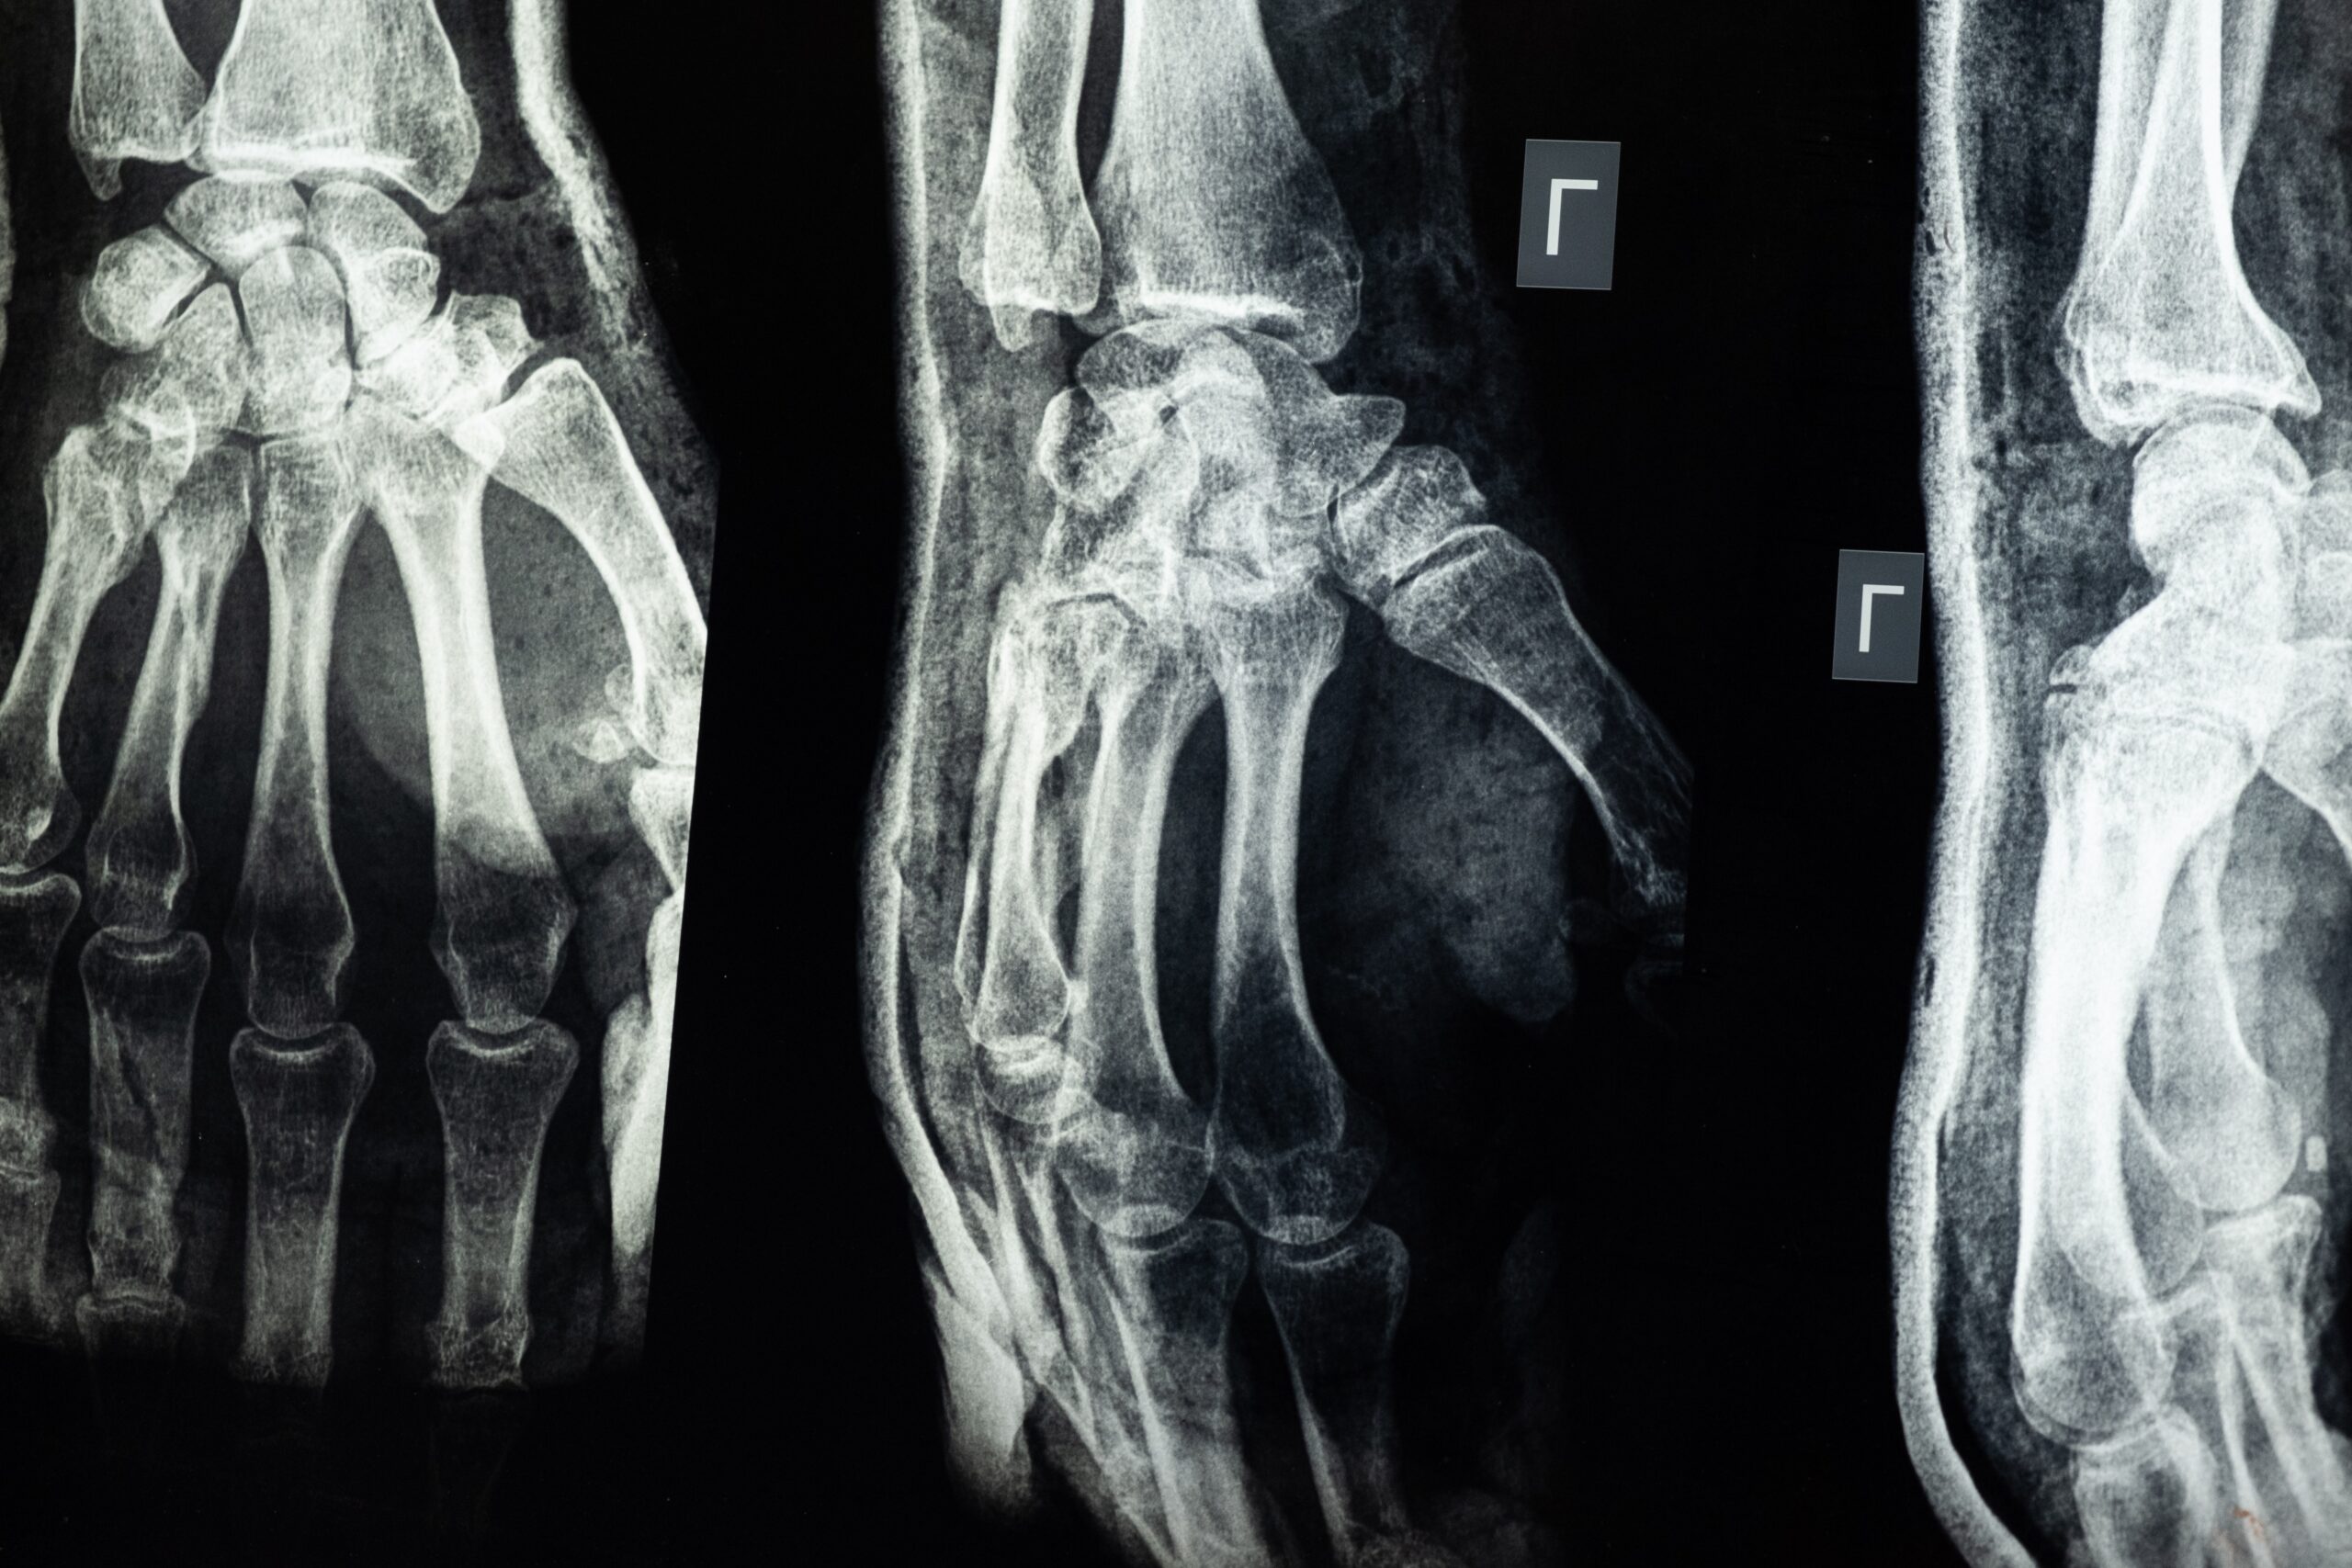 Medical imaging of an injury on the hand